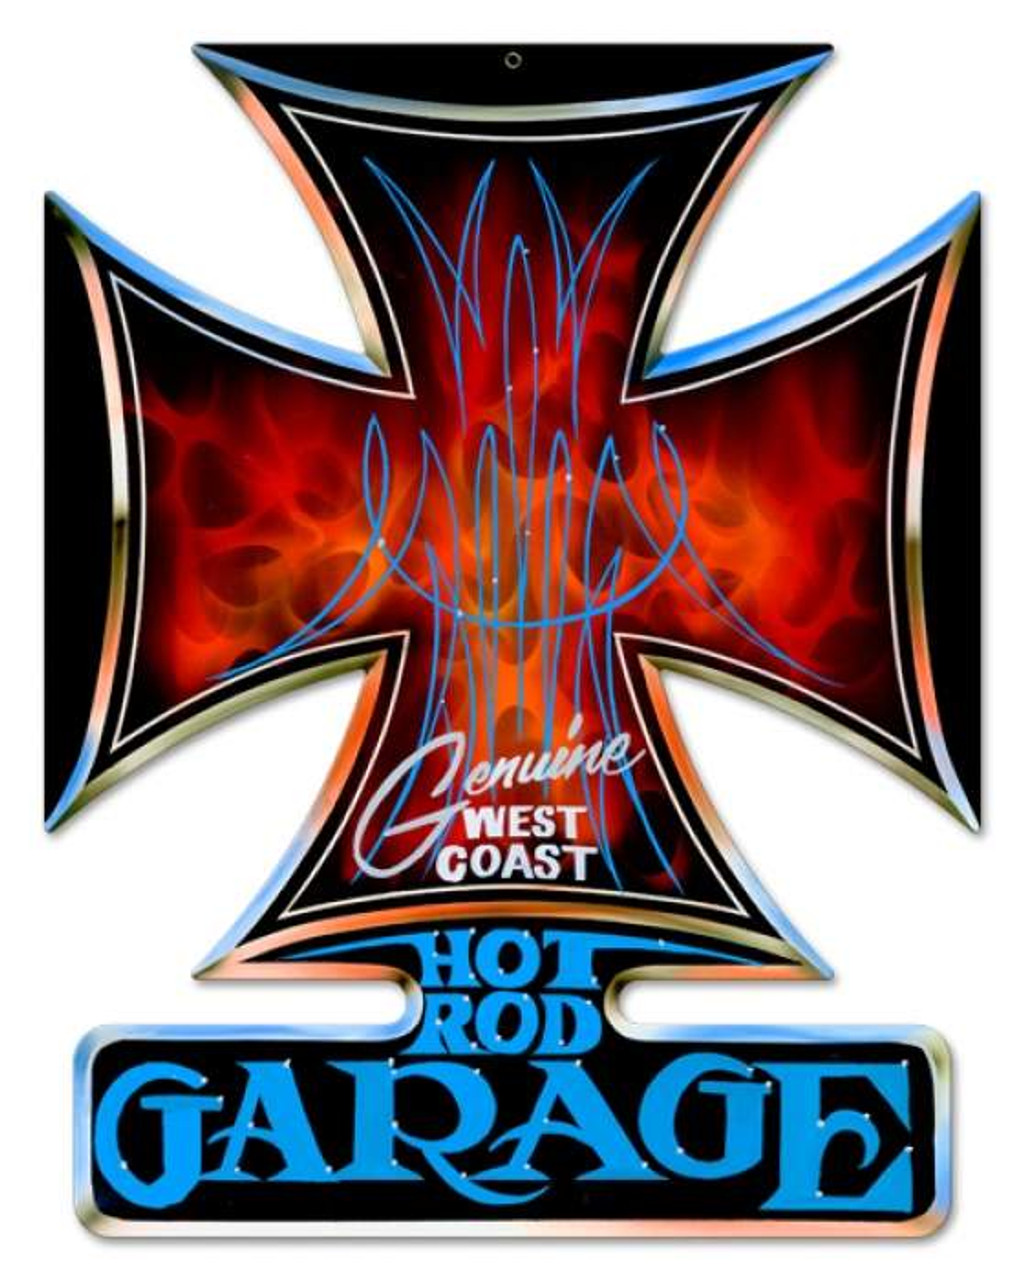 Vintage Hot Rod Garage Iron Cross Metal Sign 14 x 18 Inches